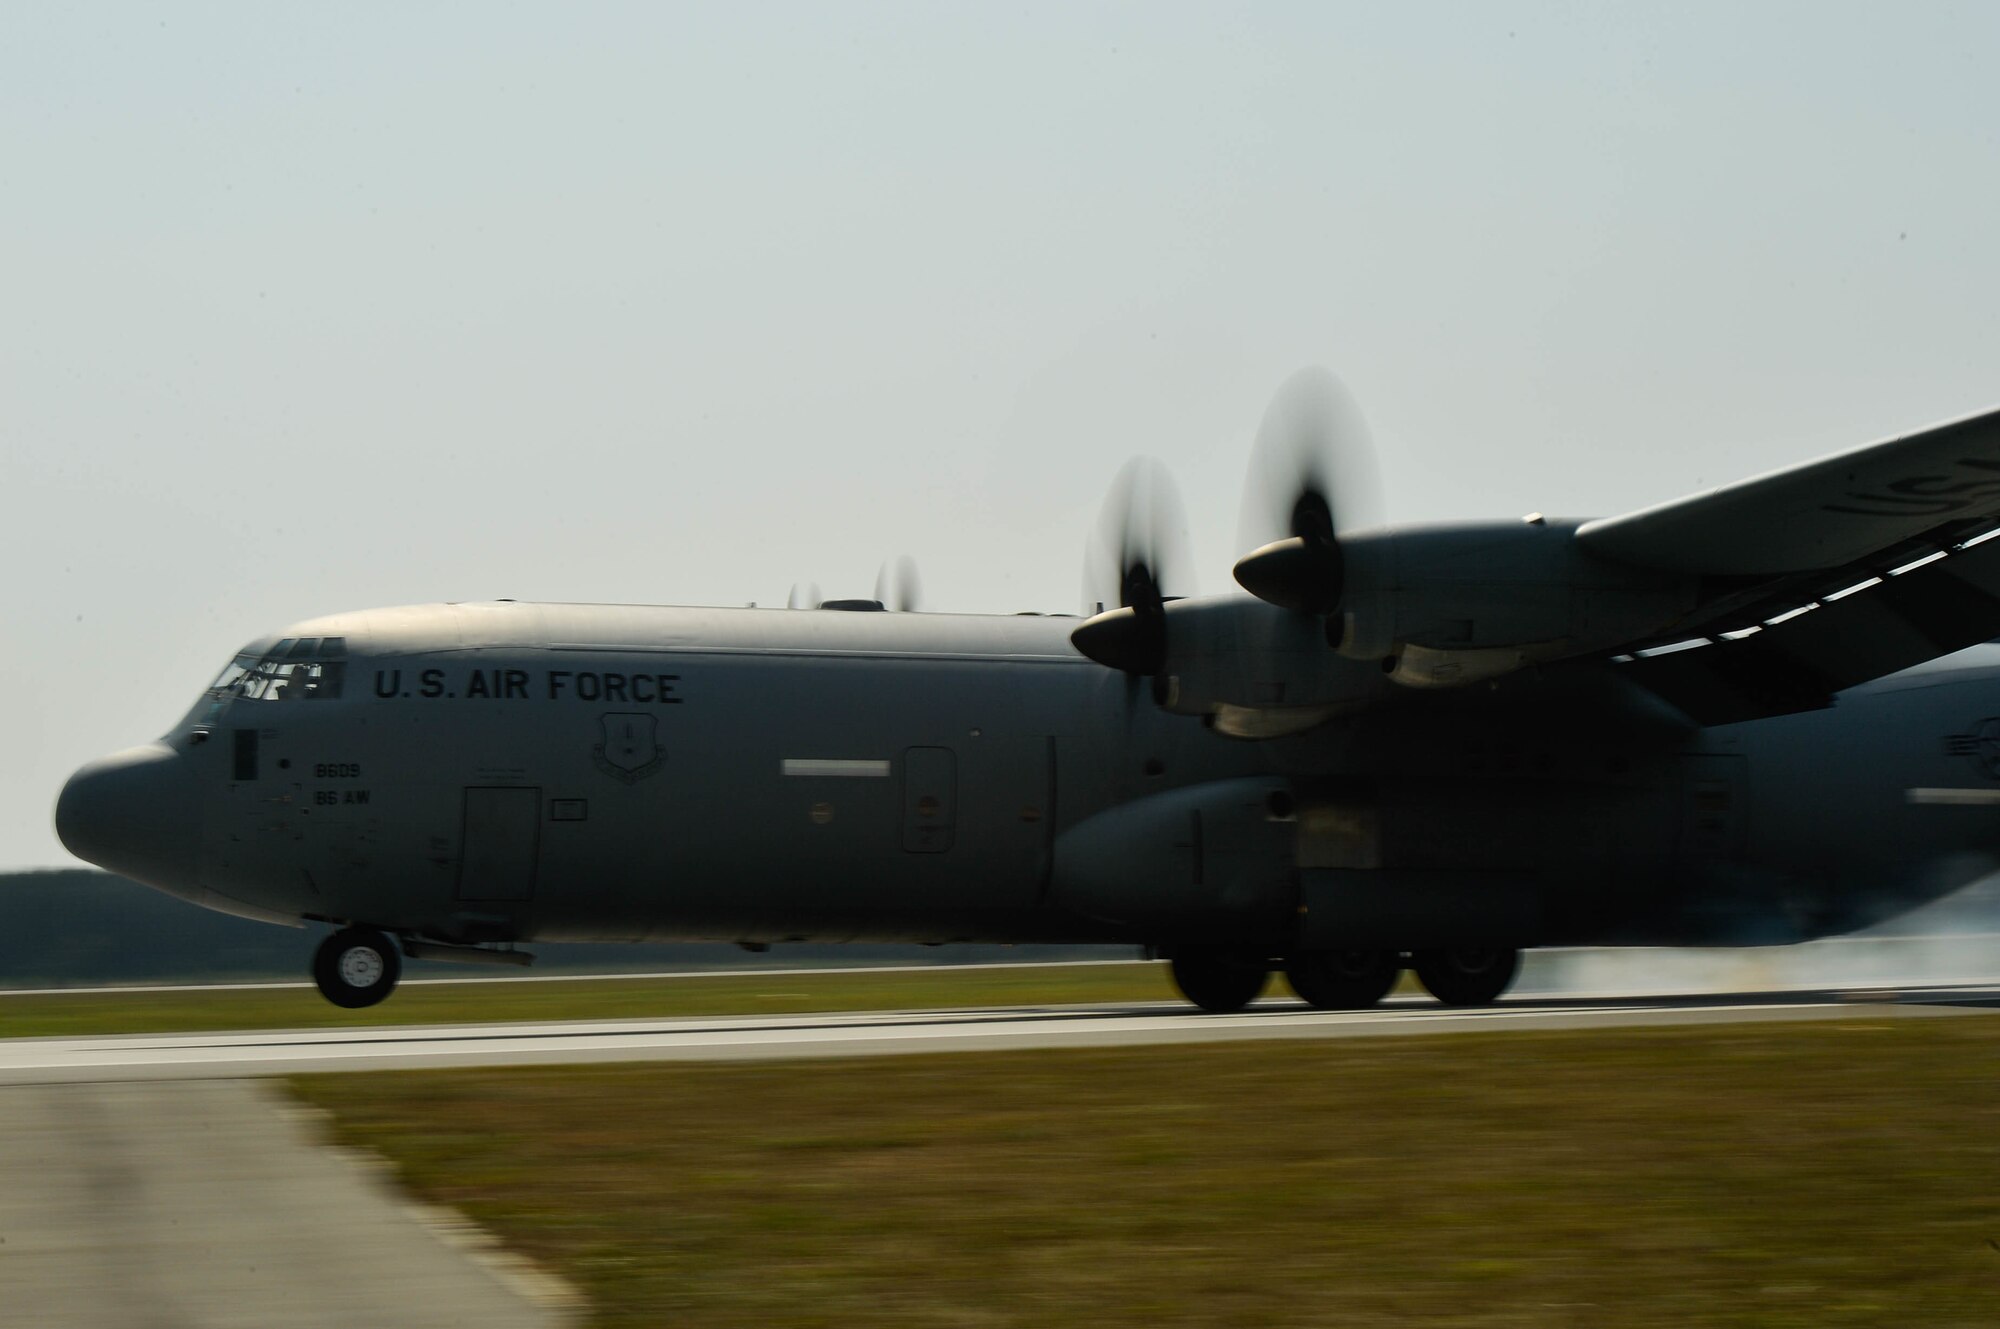 A U.S. Air Force C-130J Super Hercules assigned to the 37th Airlift Squadron lands on Powidz Air Base, Poland, Aug. 9, 2018. Airmen and aircraft assigned to the 37th Airlift Squadron conduct bilateral training exercises in Poland annually. (U.S. Air Force photo by Senior Airman Joshua Magbanua)